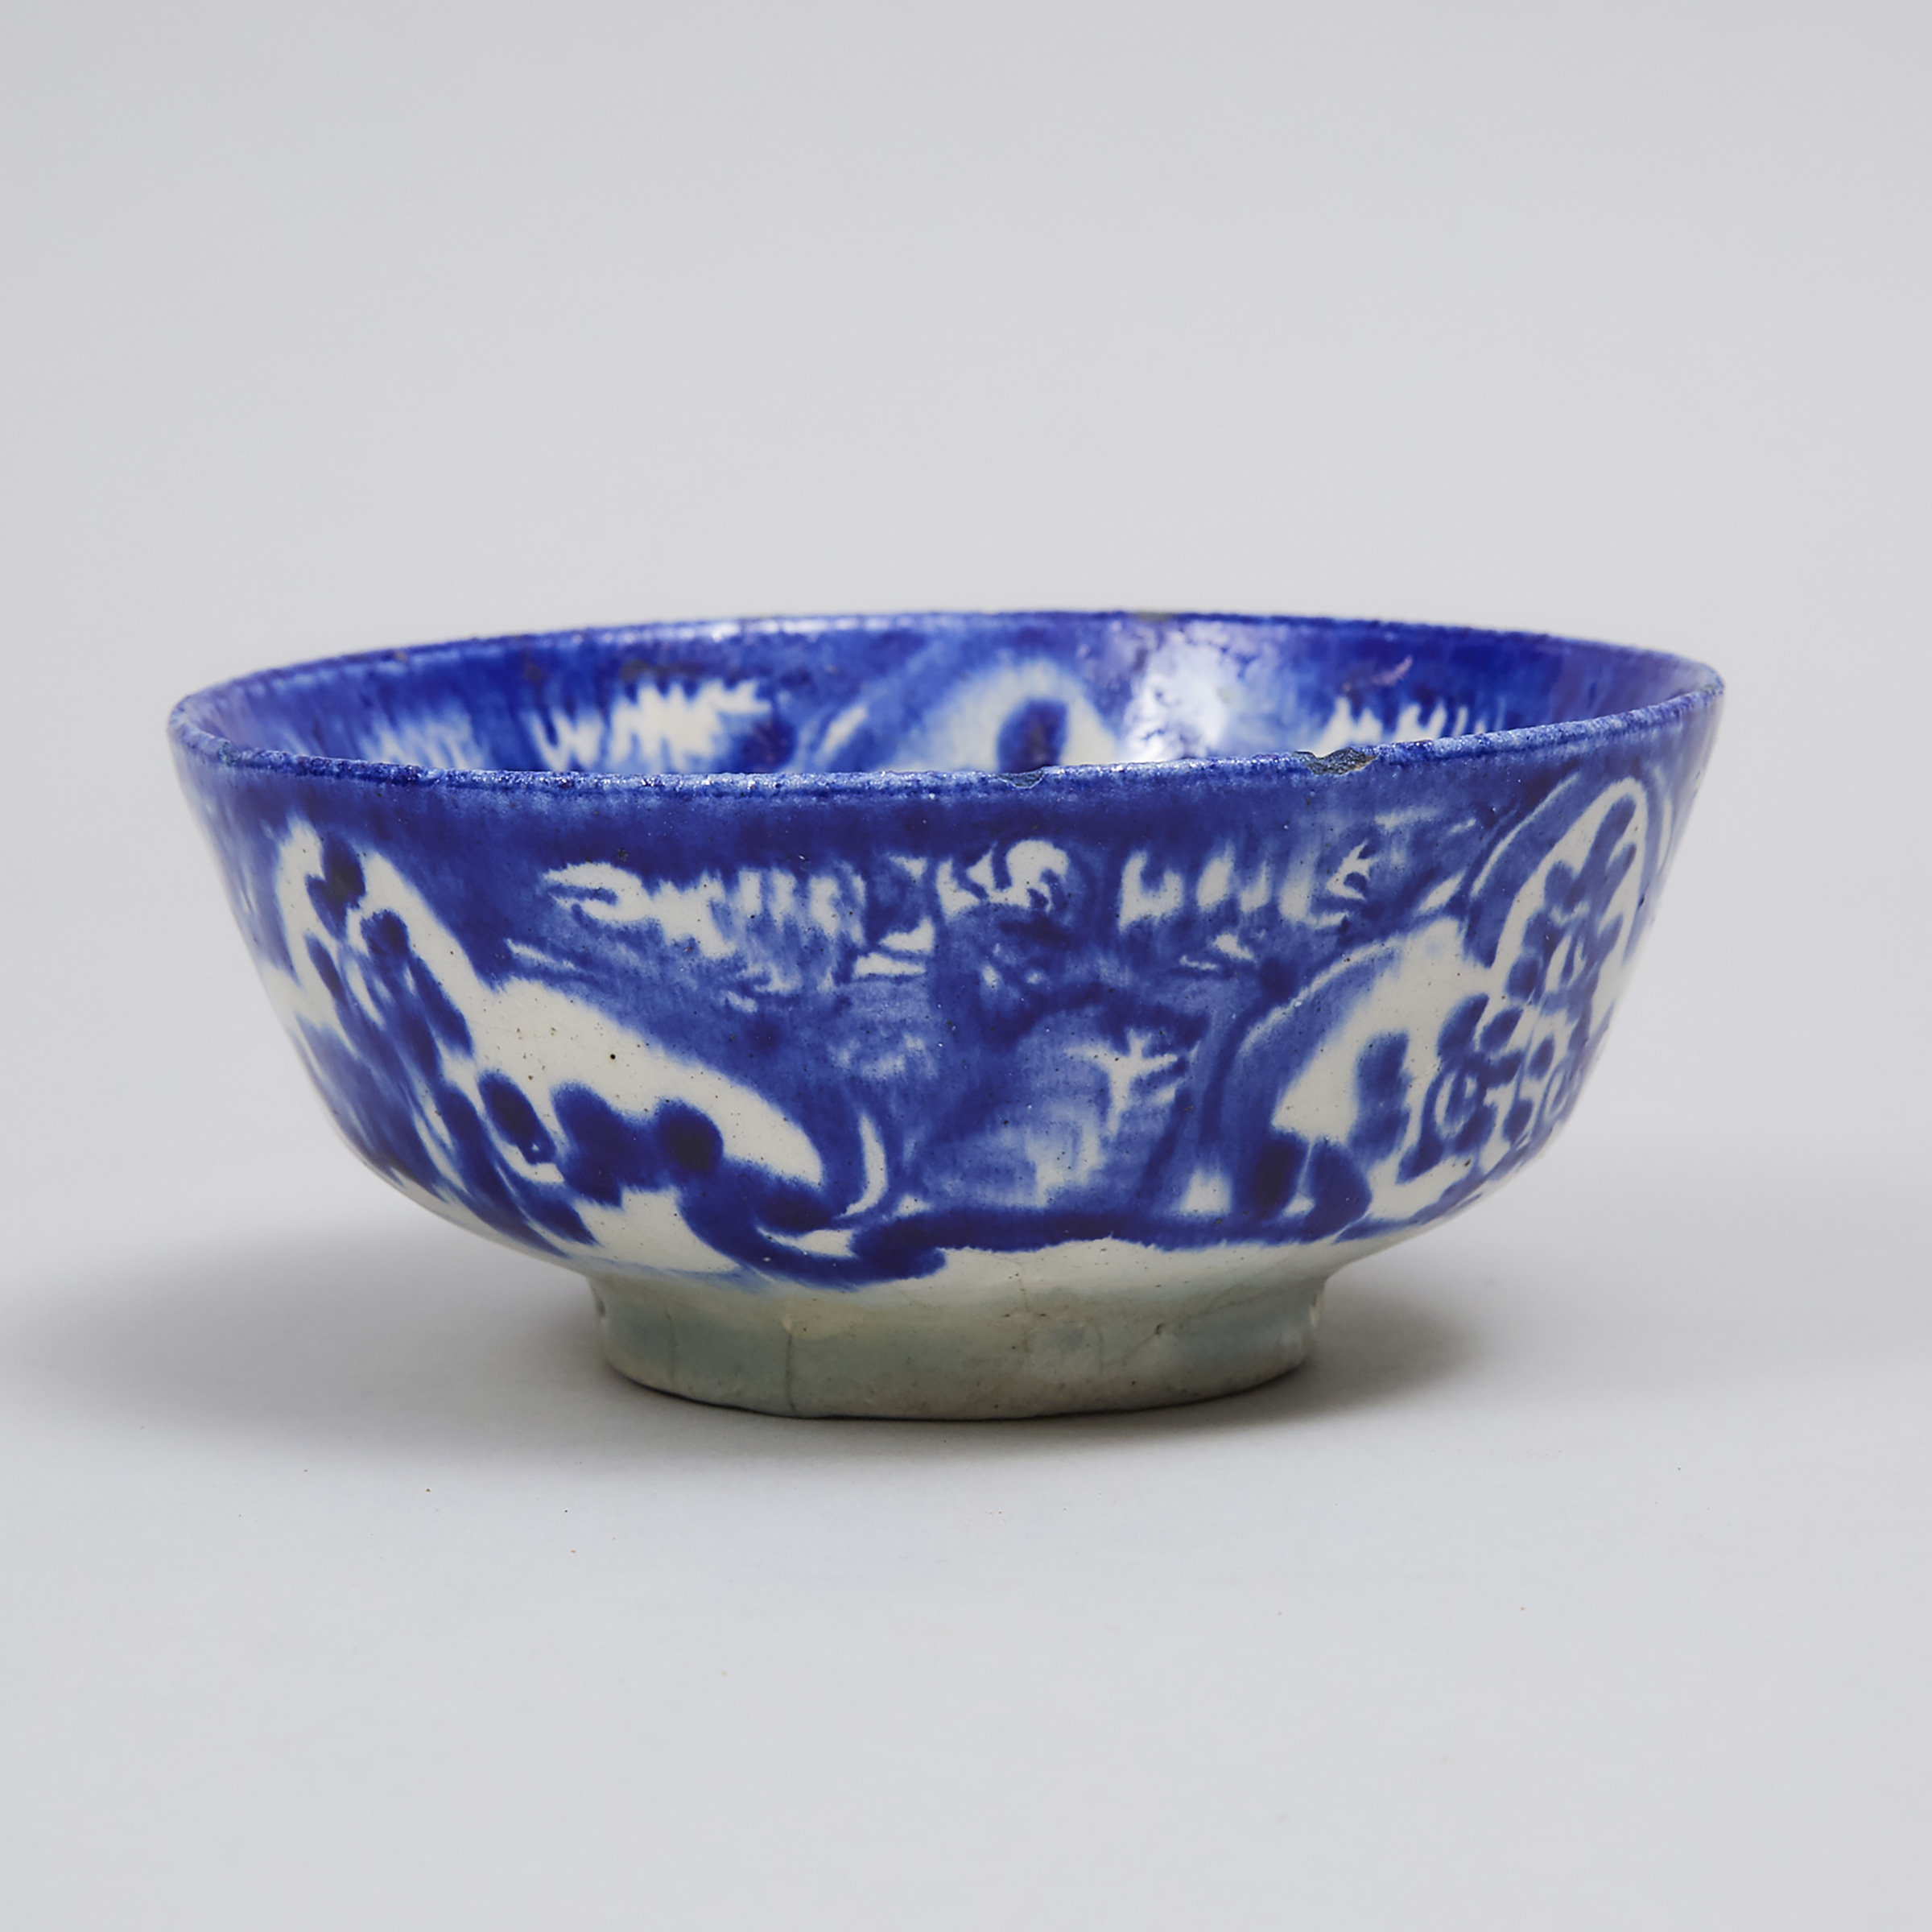 Qajar Blue and White Pottery Bowl, Persia, 18th/19th century